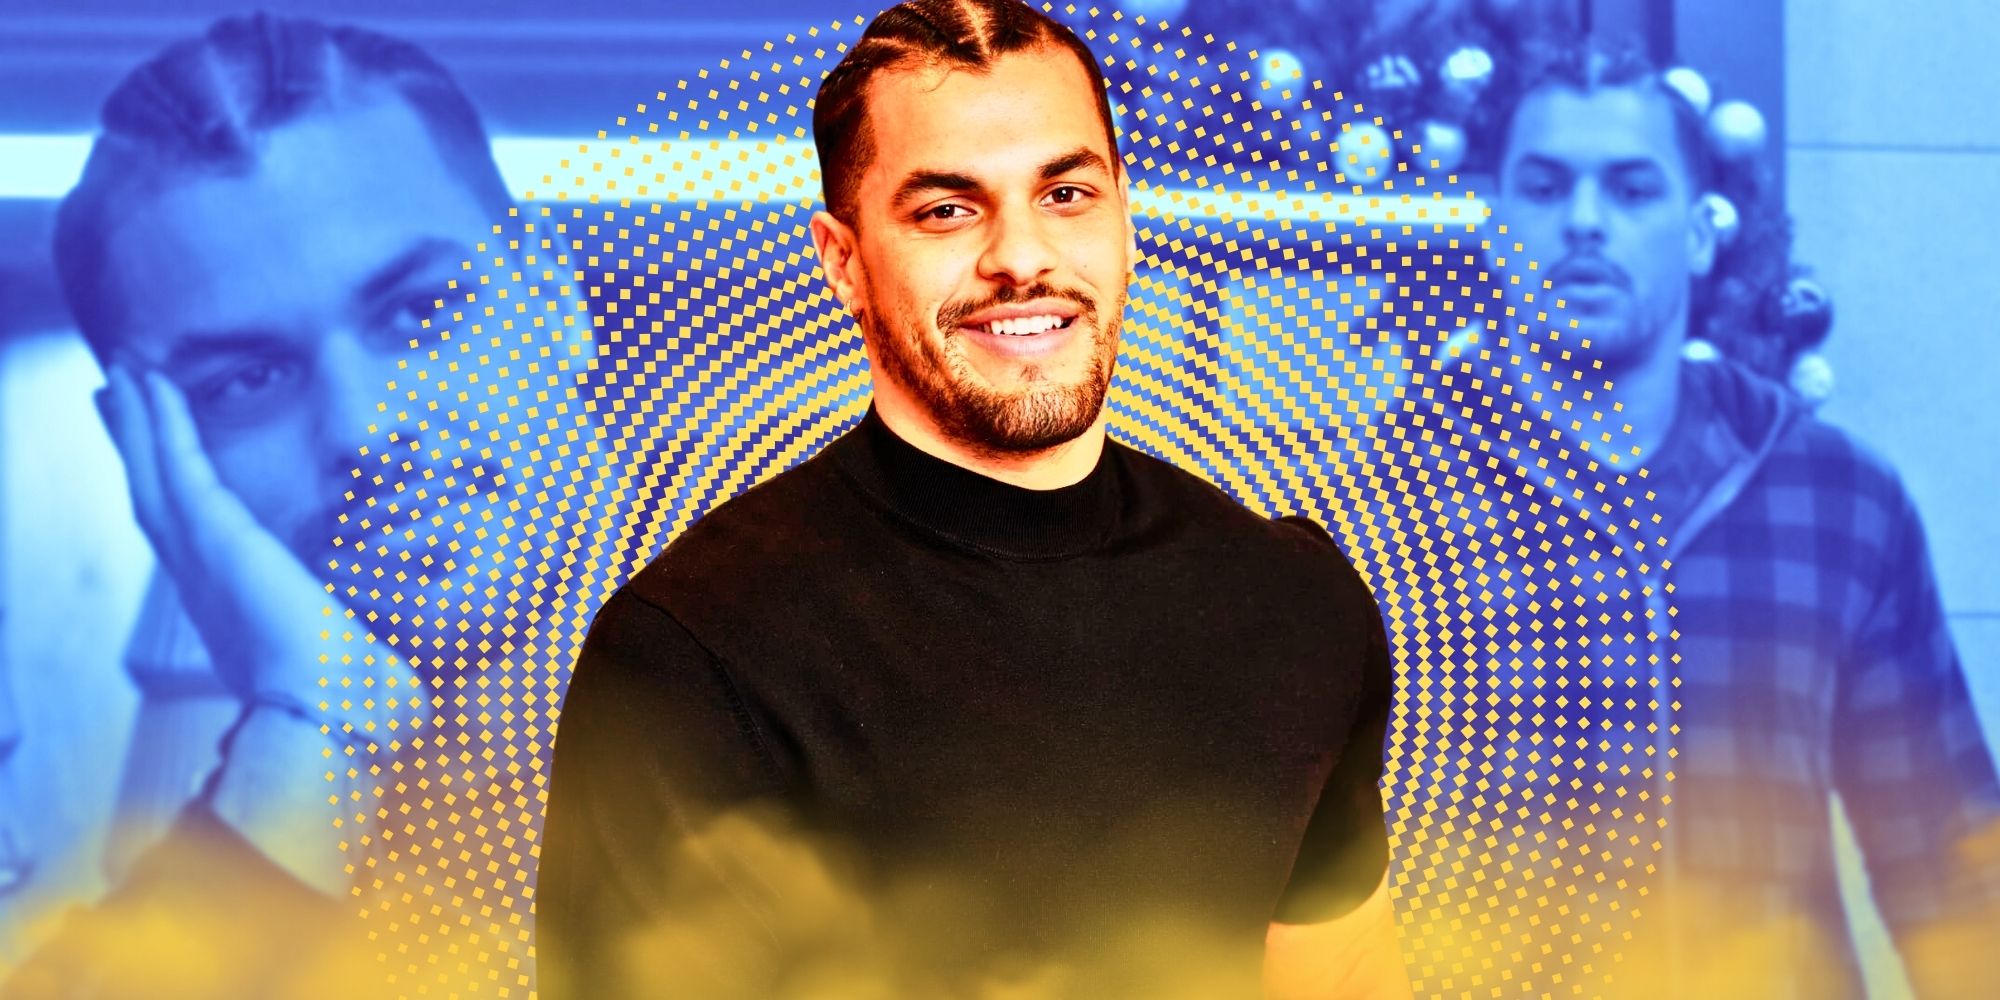 Montage of Big Brother's Josh Martinez with blue background